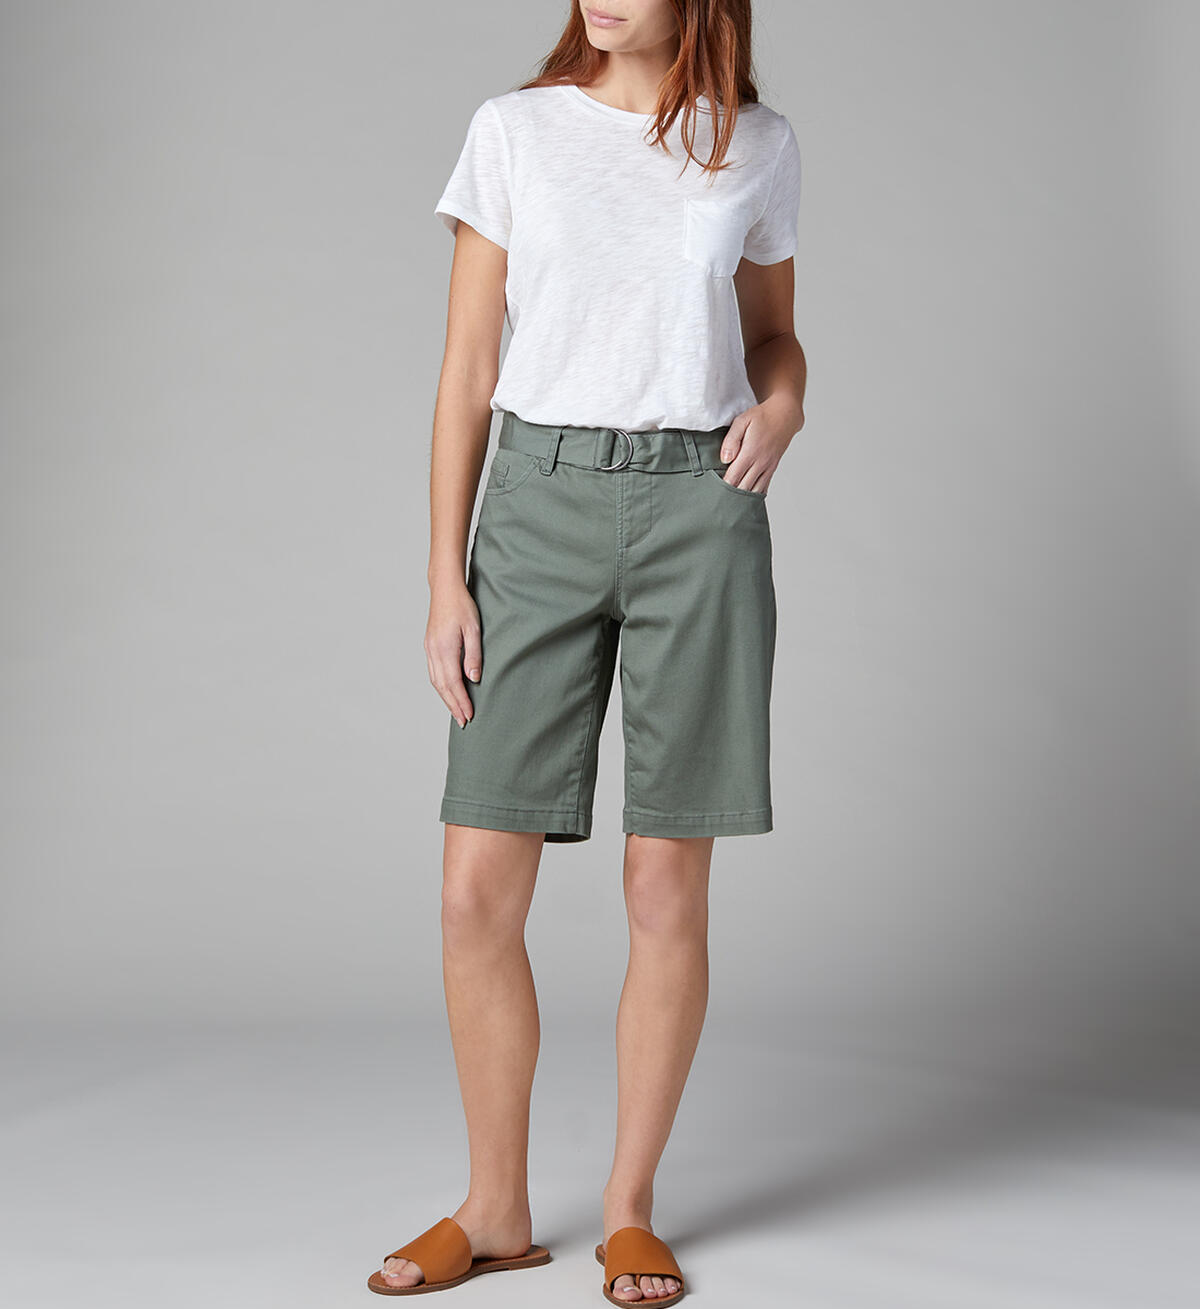 Thelma Mid Rise Bermuda Shorts with Belt Petite, , hi-res image number 2